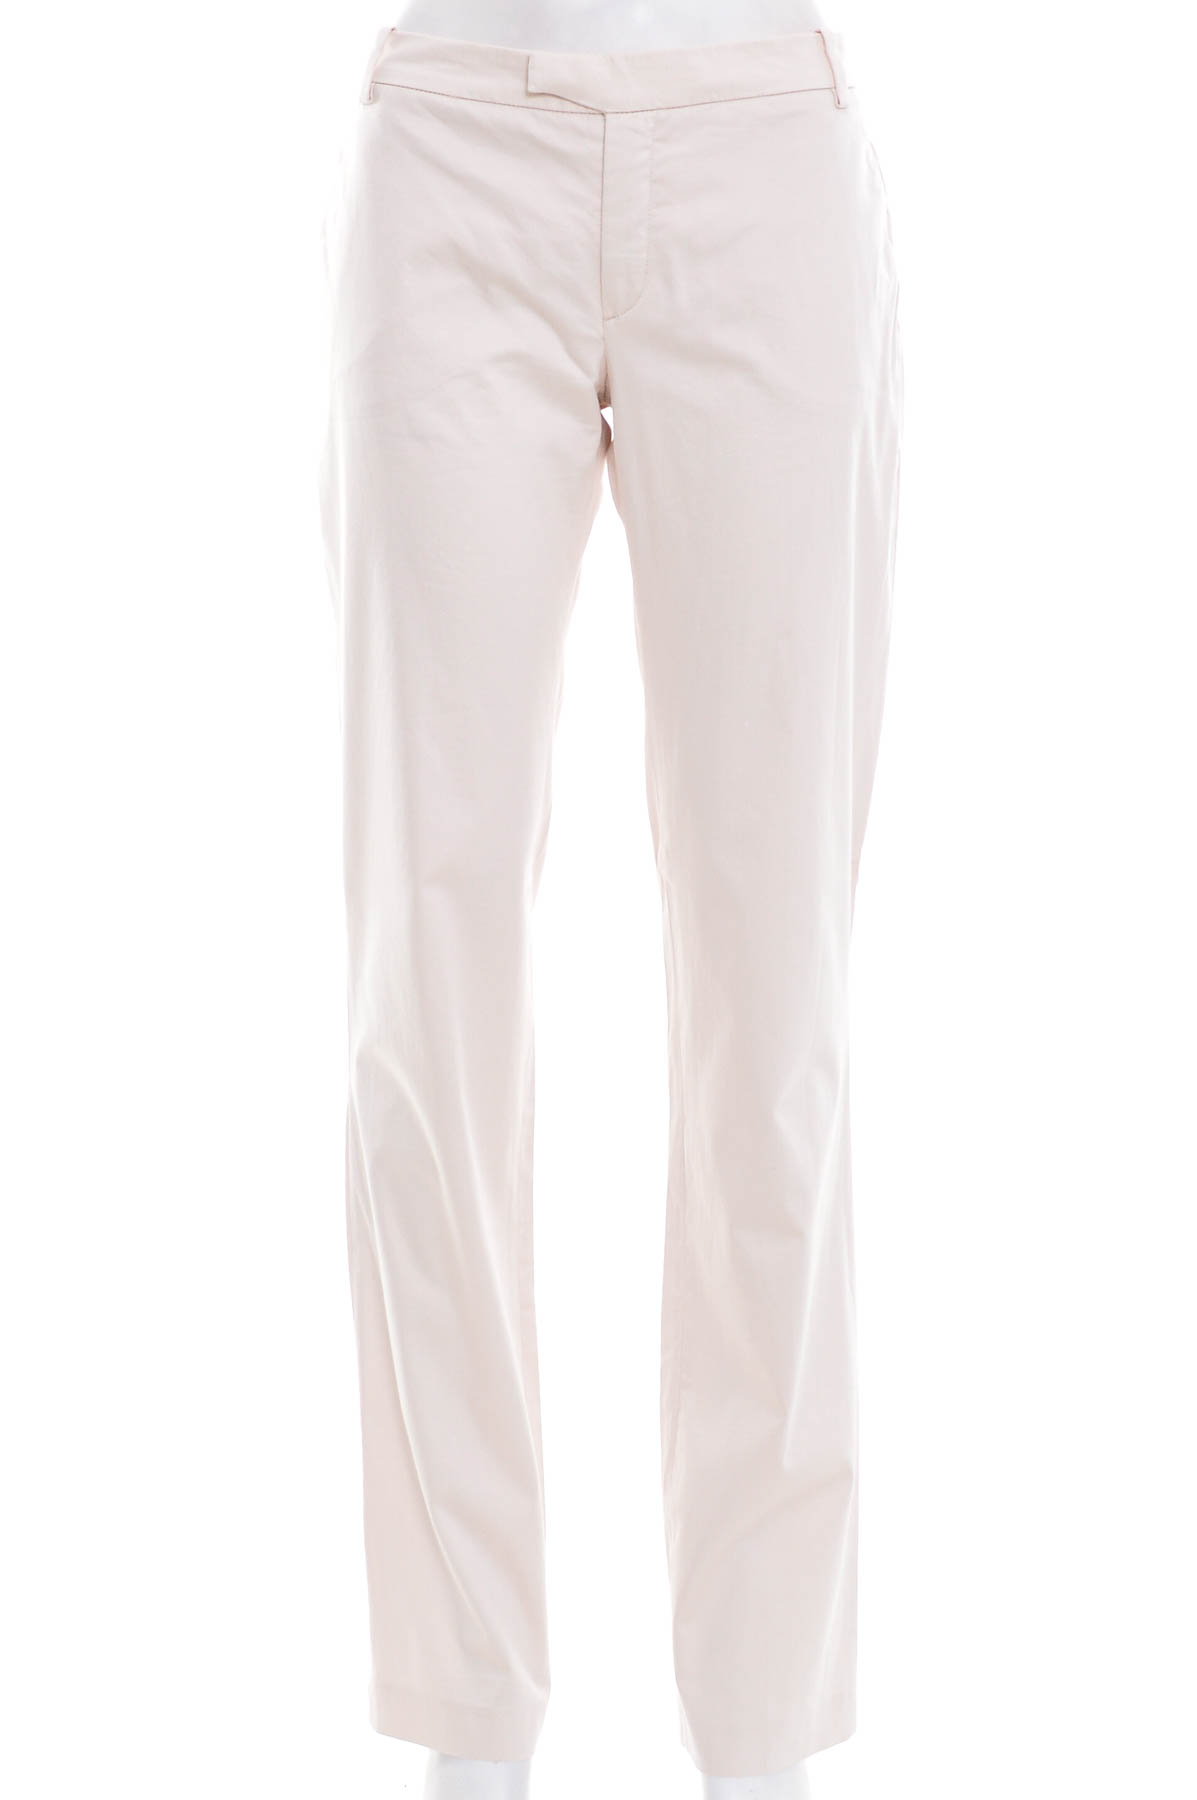 Women's trousers - DRYKORN FOR BEAUTIFUL PEOPLE - 0